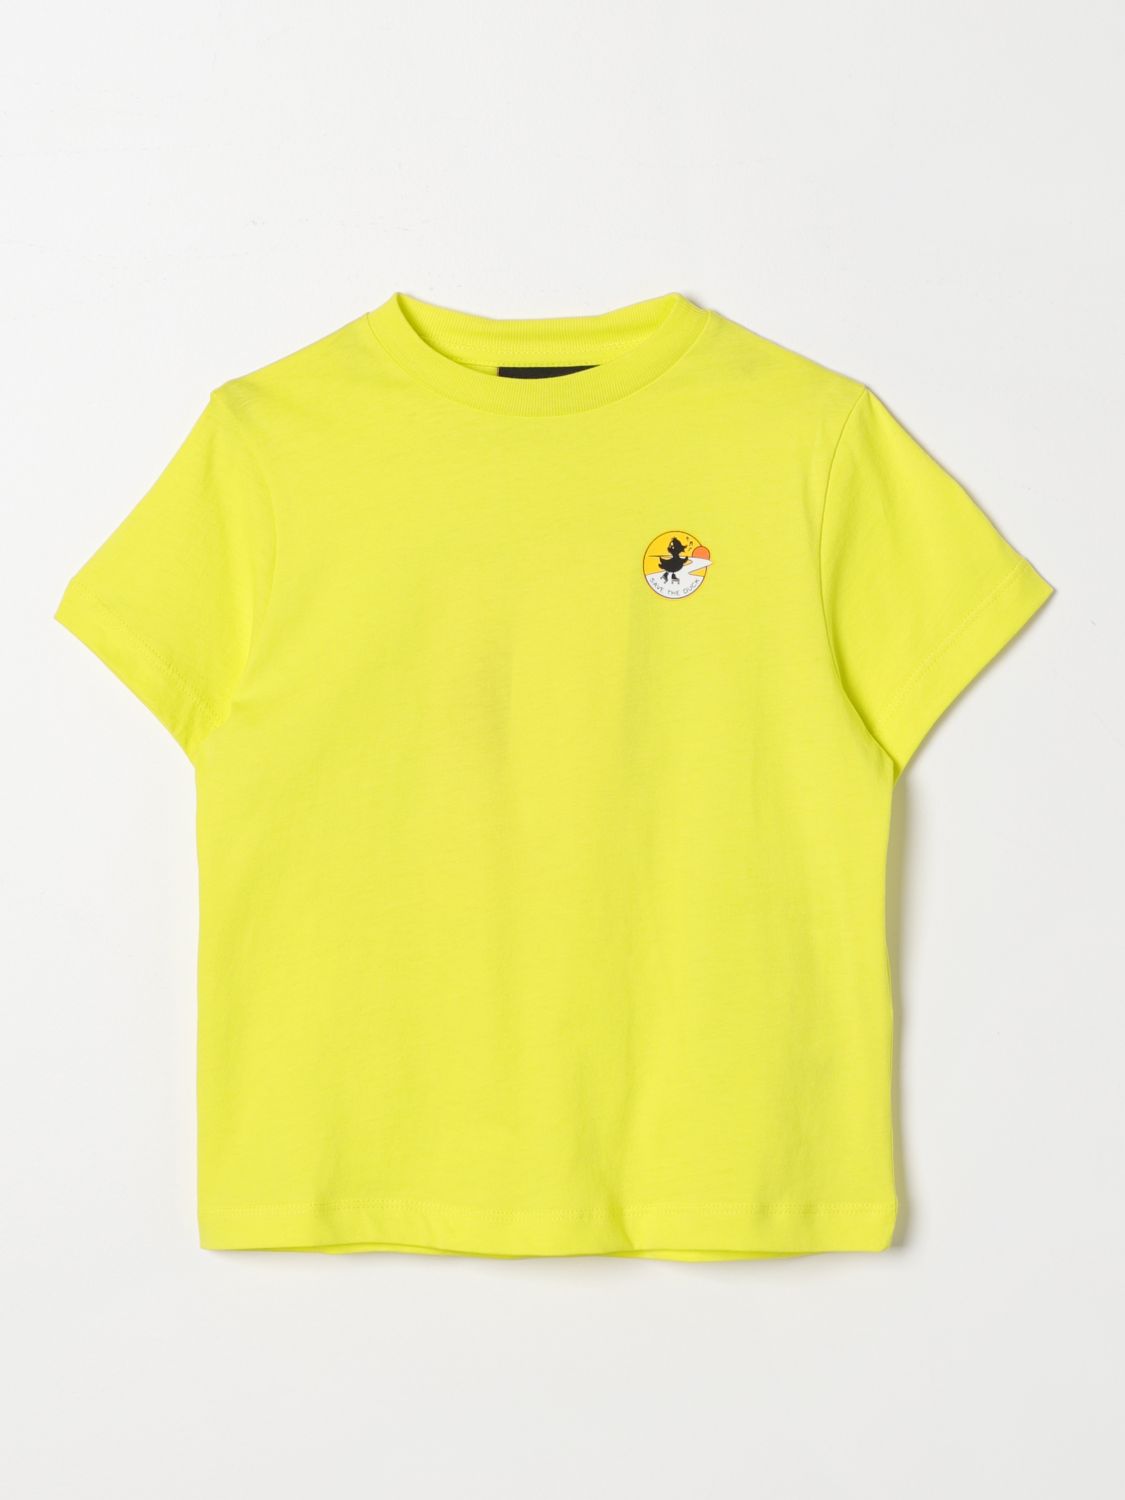 t-shirt save the duck kids colour yellow